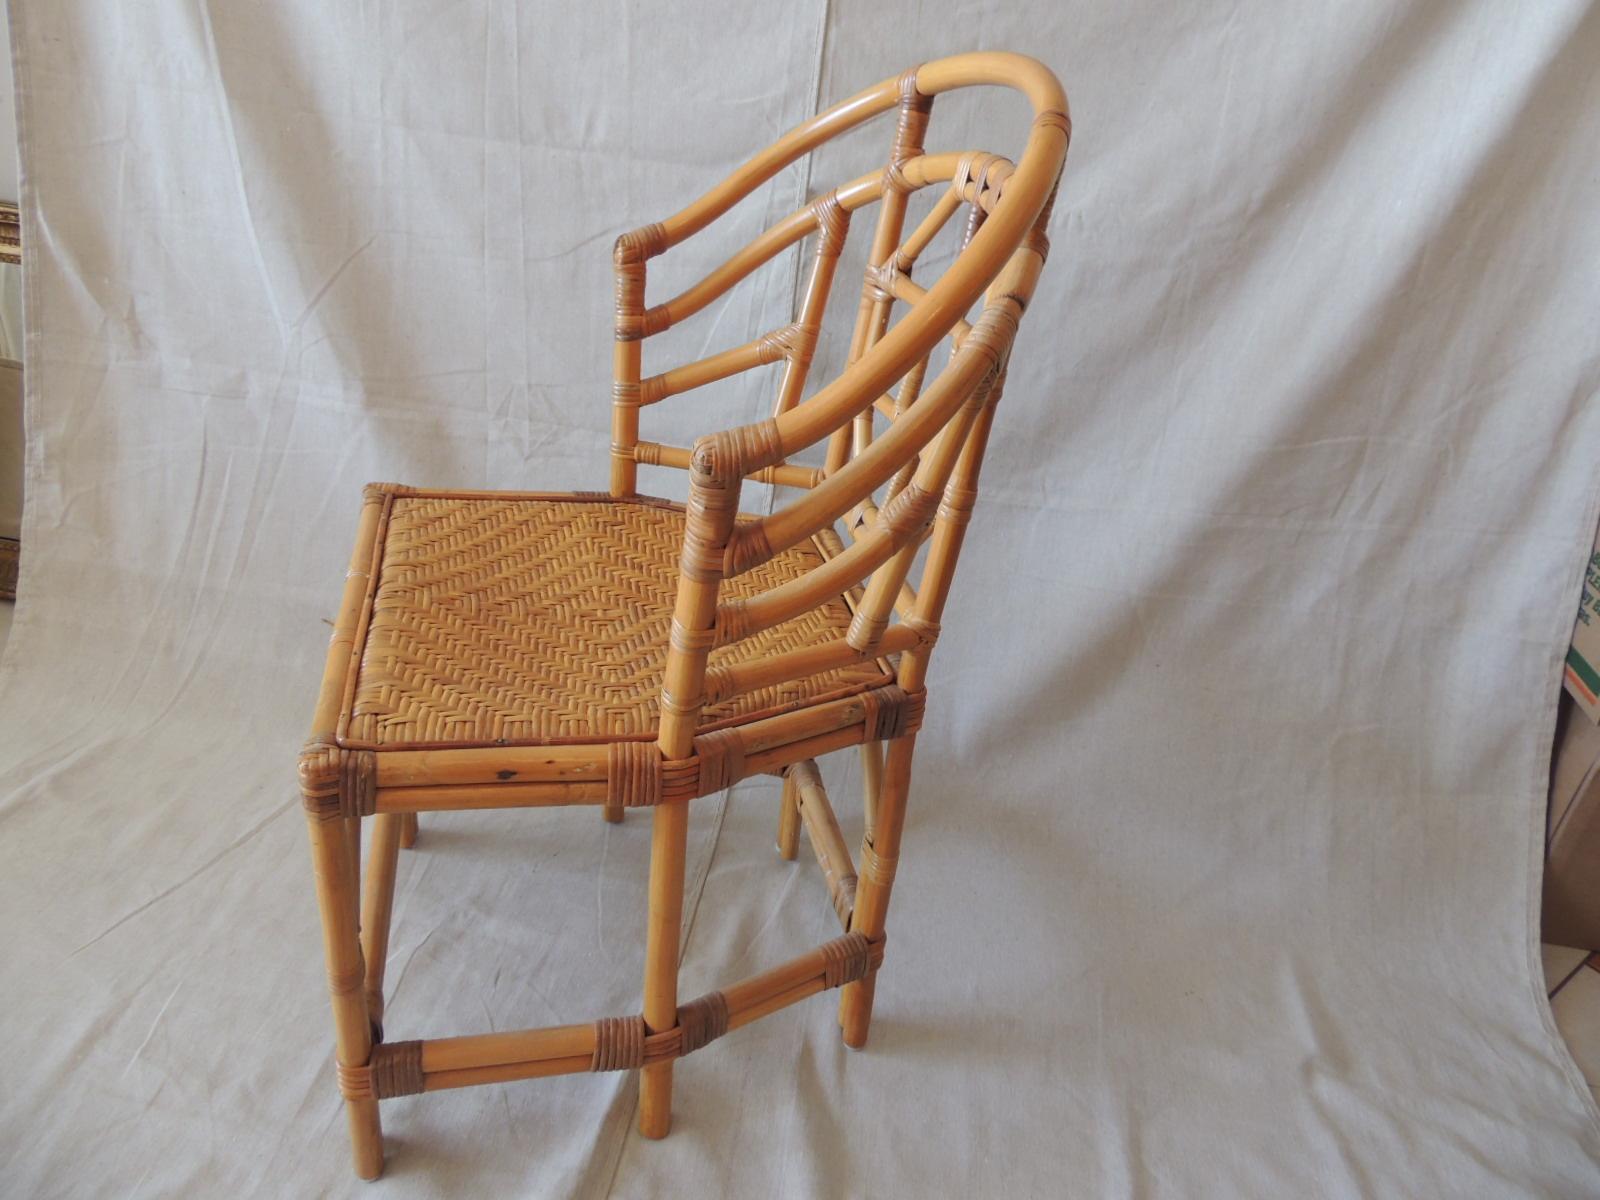 Asian Vintage Chinese Chippindale Rattan and Wicker Arm Chair